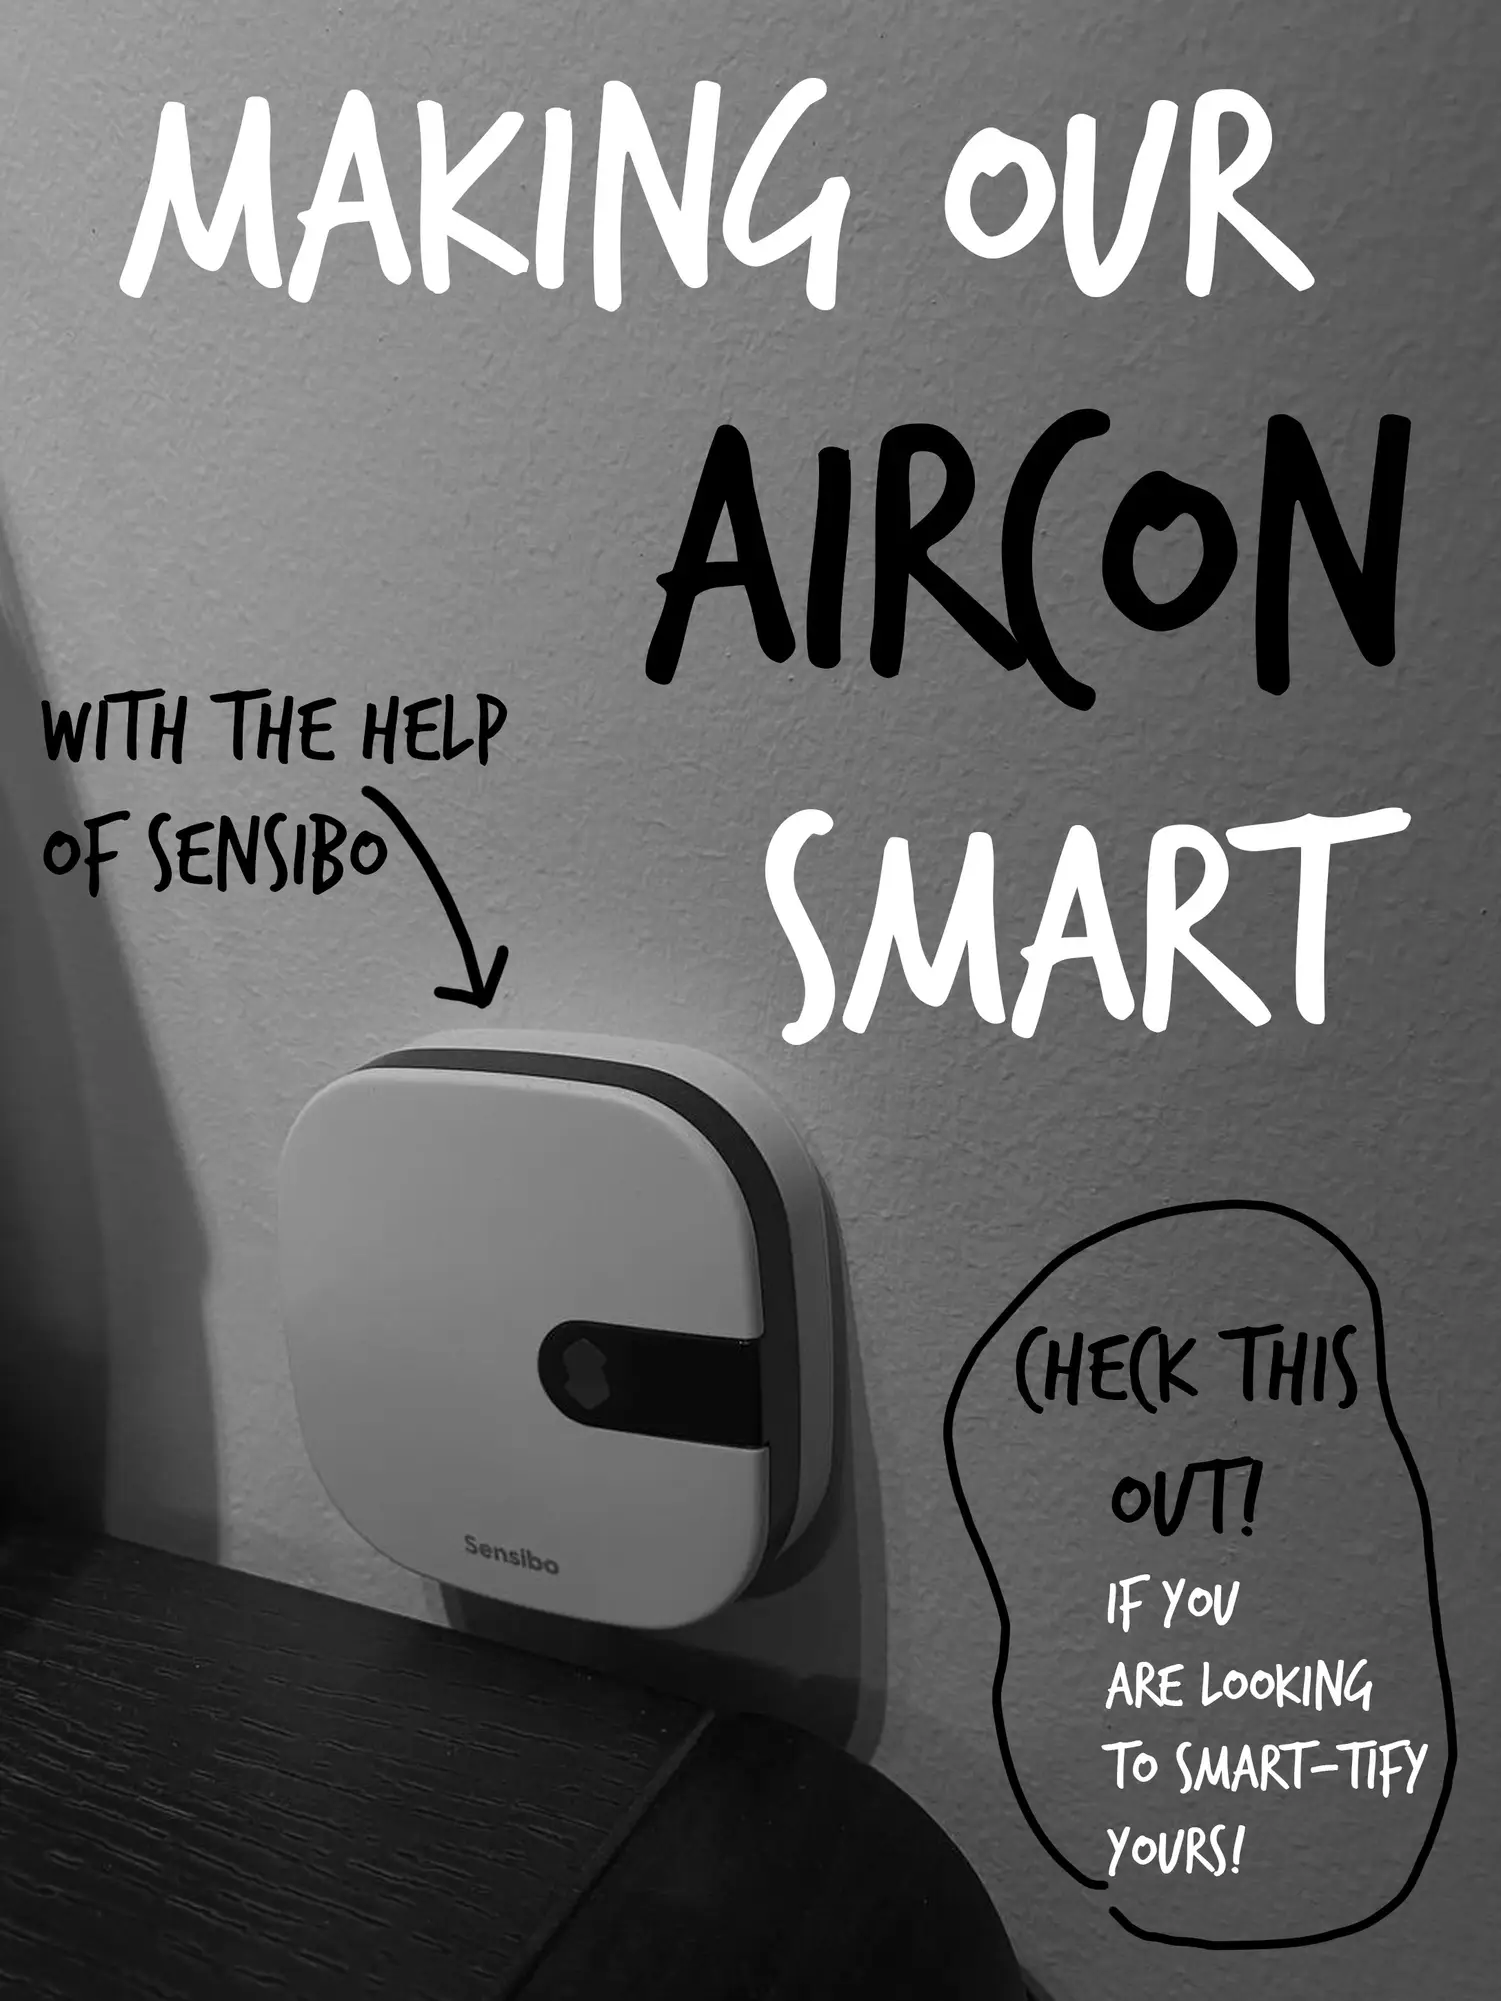 Making our aircon SMART 🧠 💡 's images